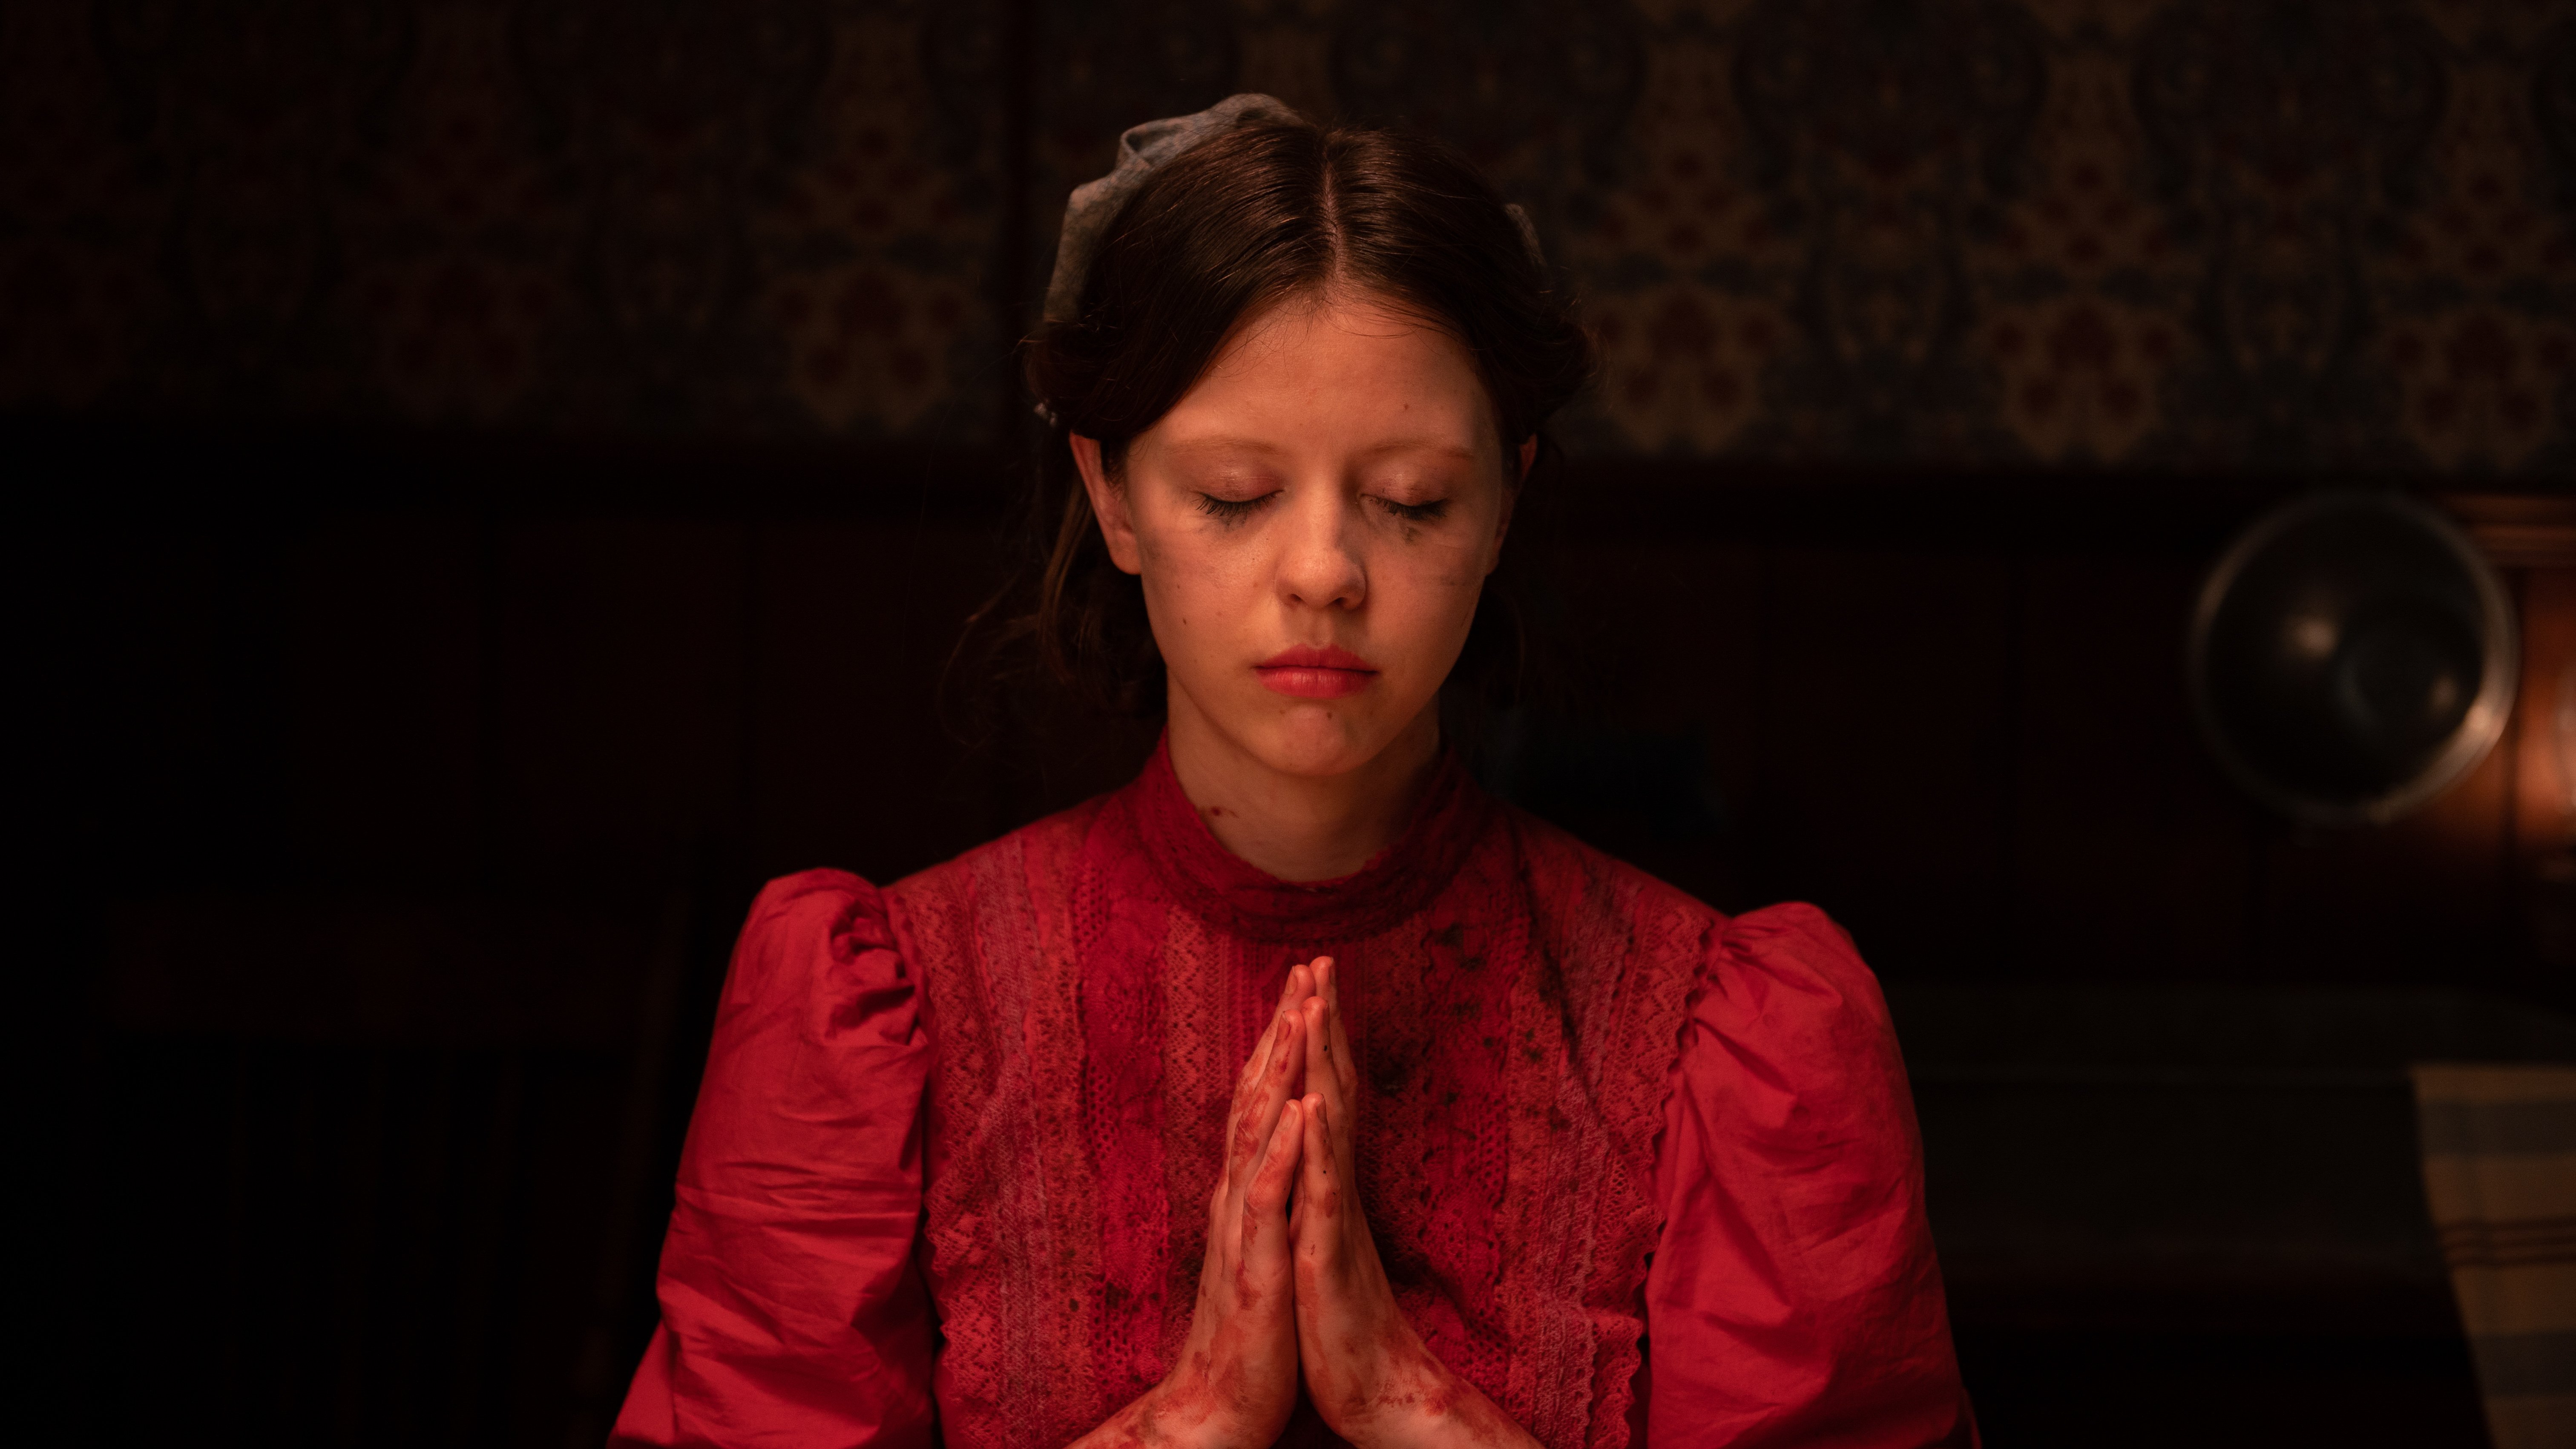 A girl in a blood-stained red dress prays with her eyes closed.